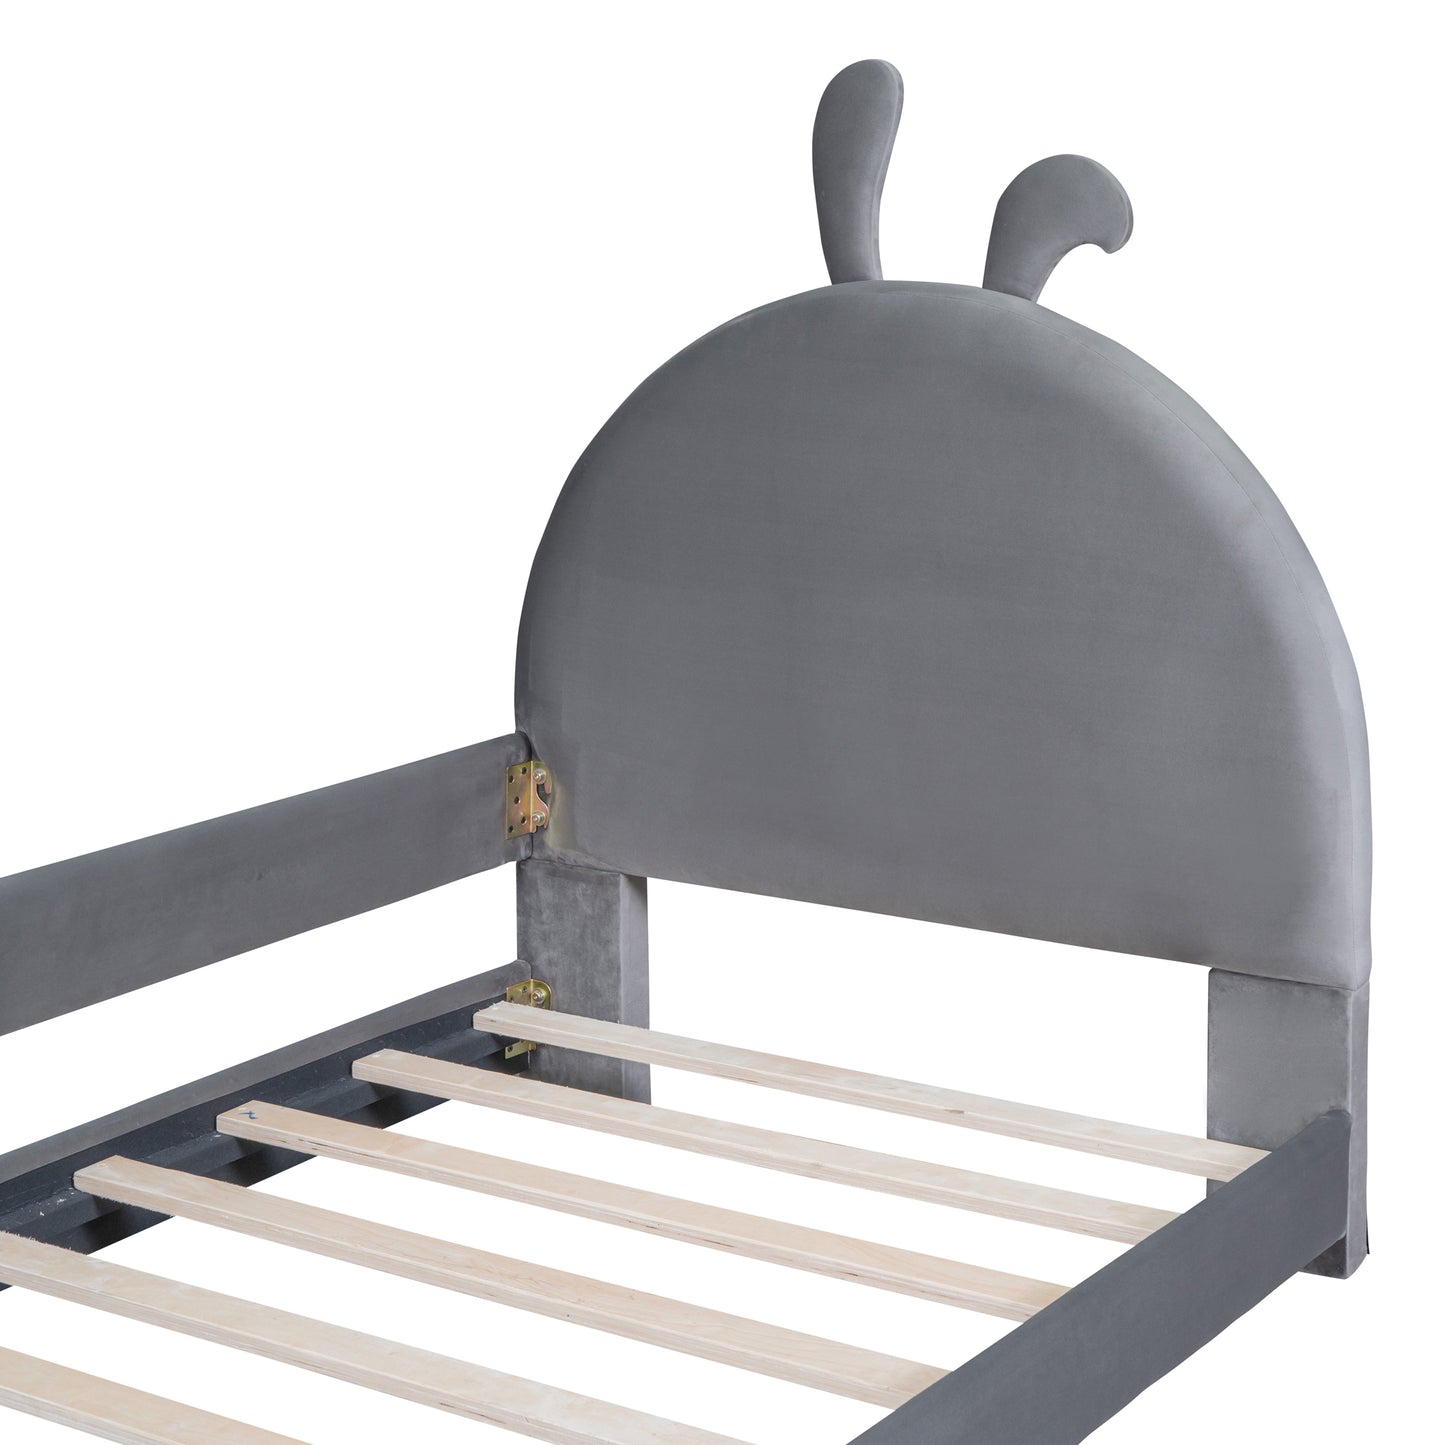 Twin Size Upholstered Daybed with Rabbit Ear Shaped Headboard, Gray